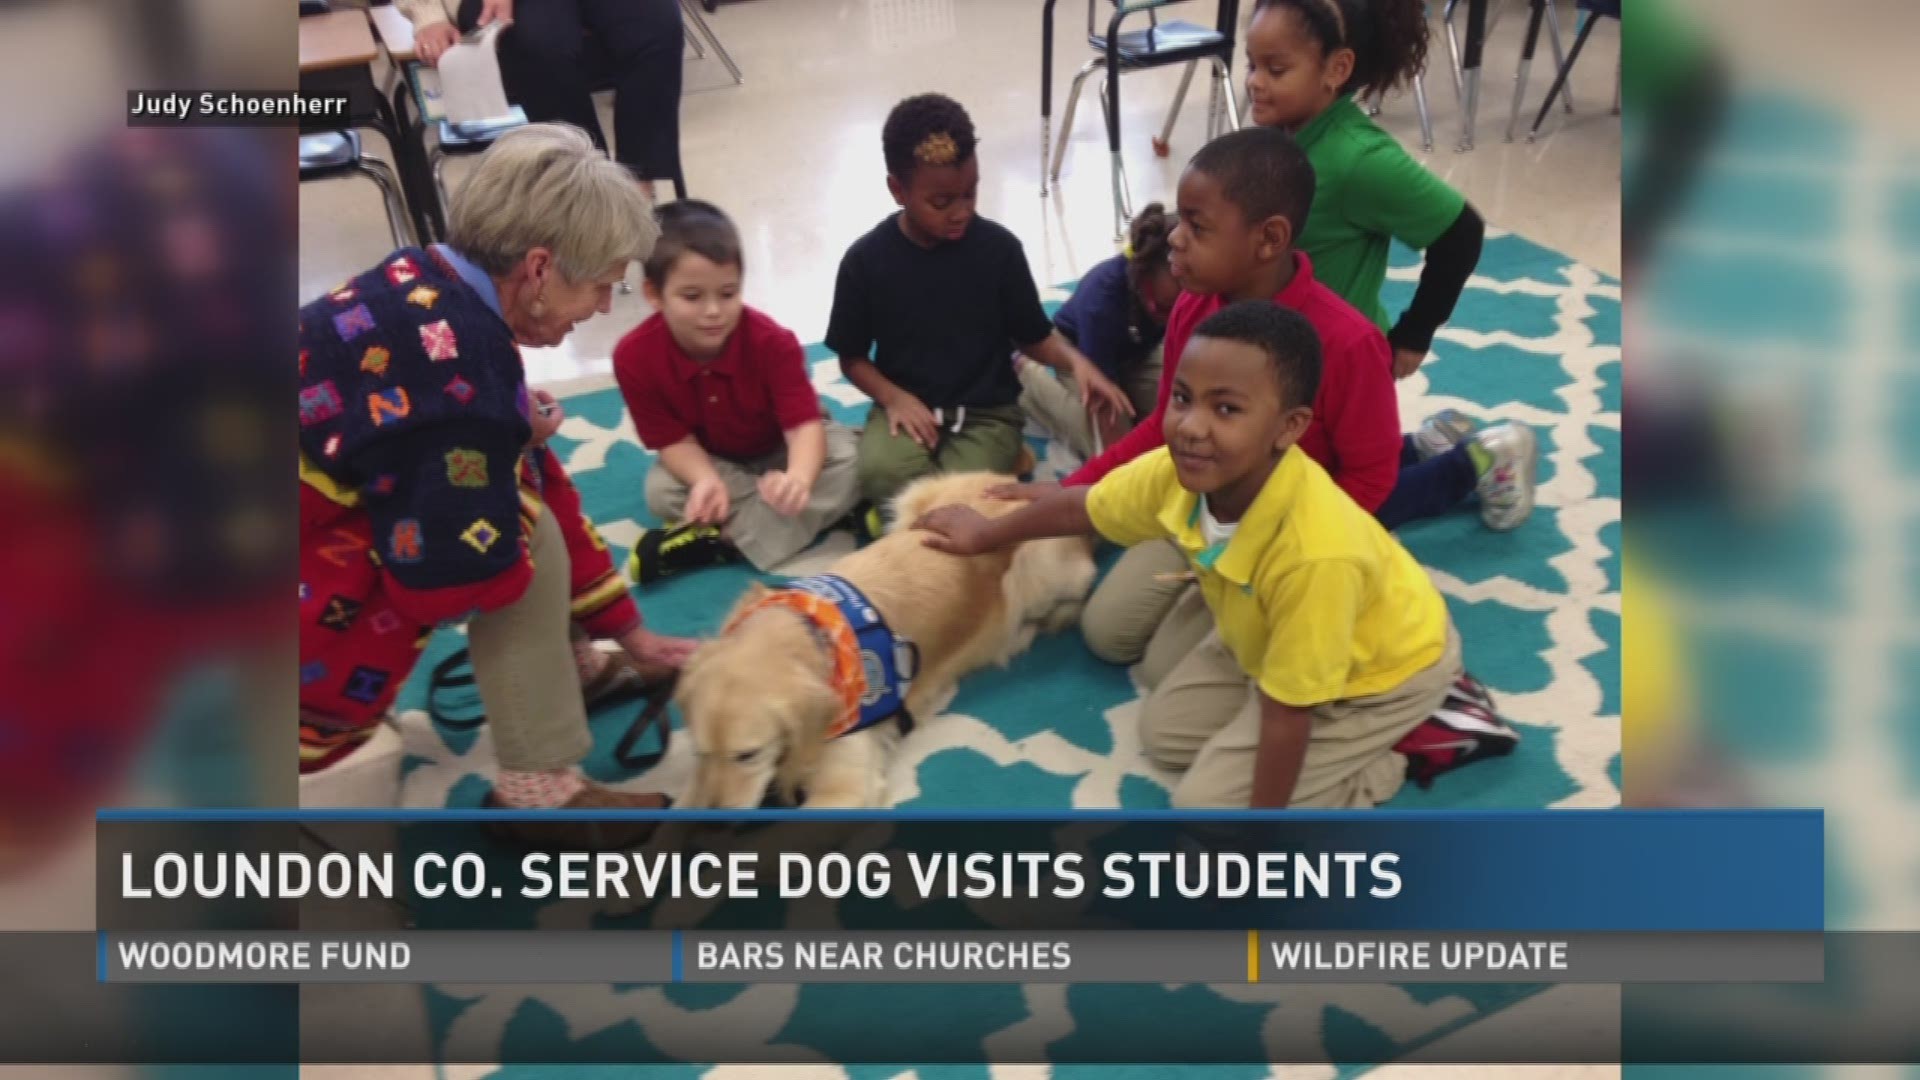 Nov. 22, 2016: A Loudon County service dog spent its day with children at Woodmore Elementary.